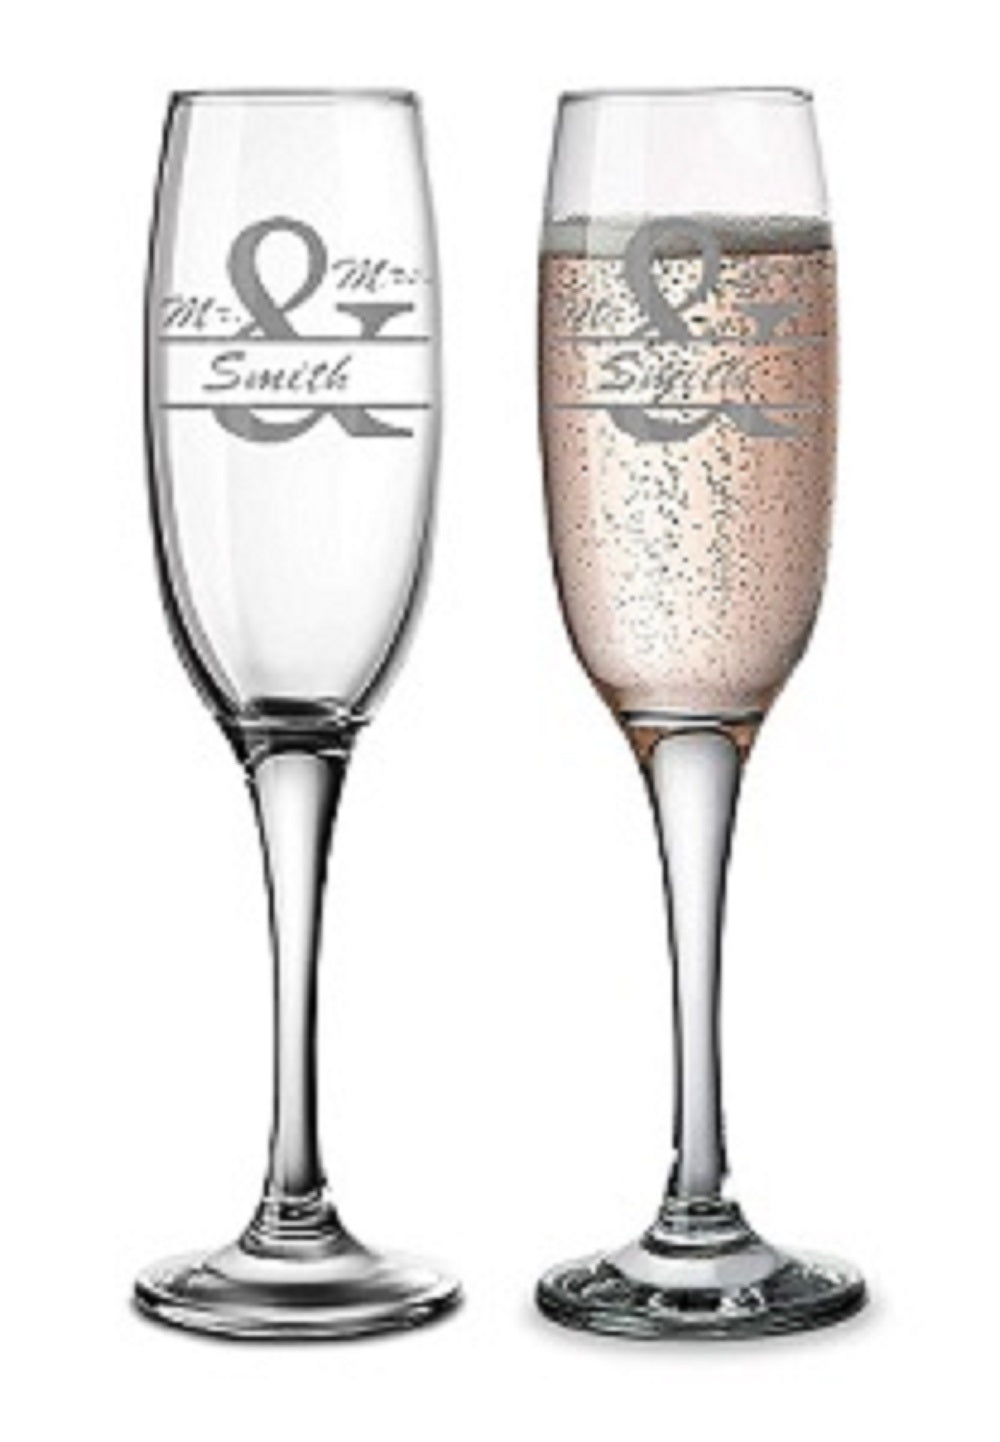 Champagne flutes glass Set of 2, Hand Blown Personalized Wedding Flutes  Toasting Glasses